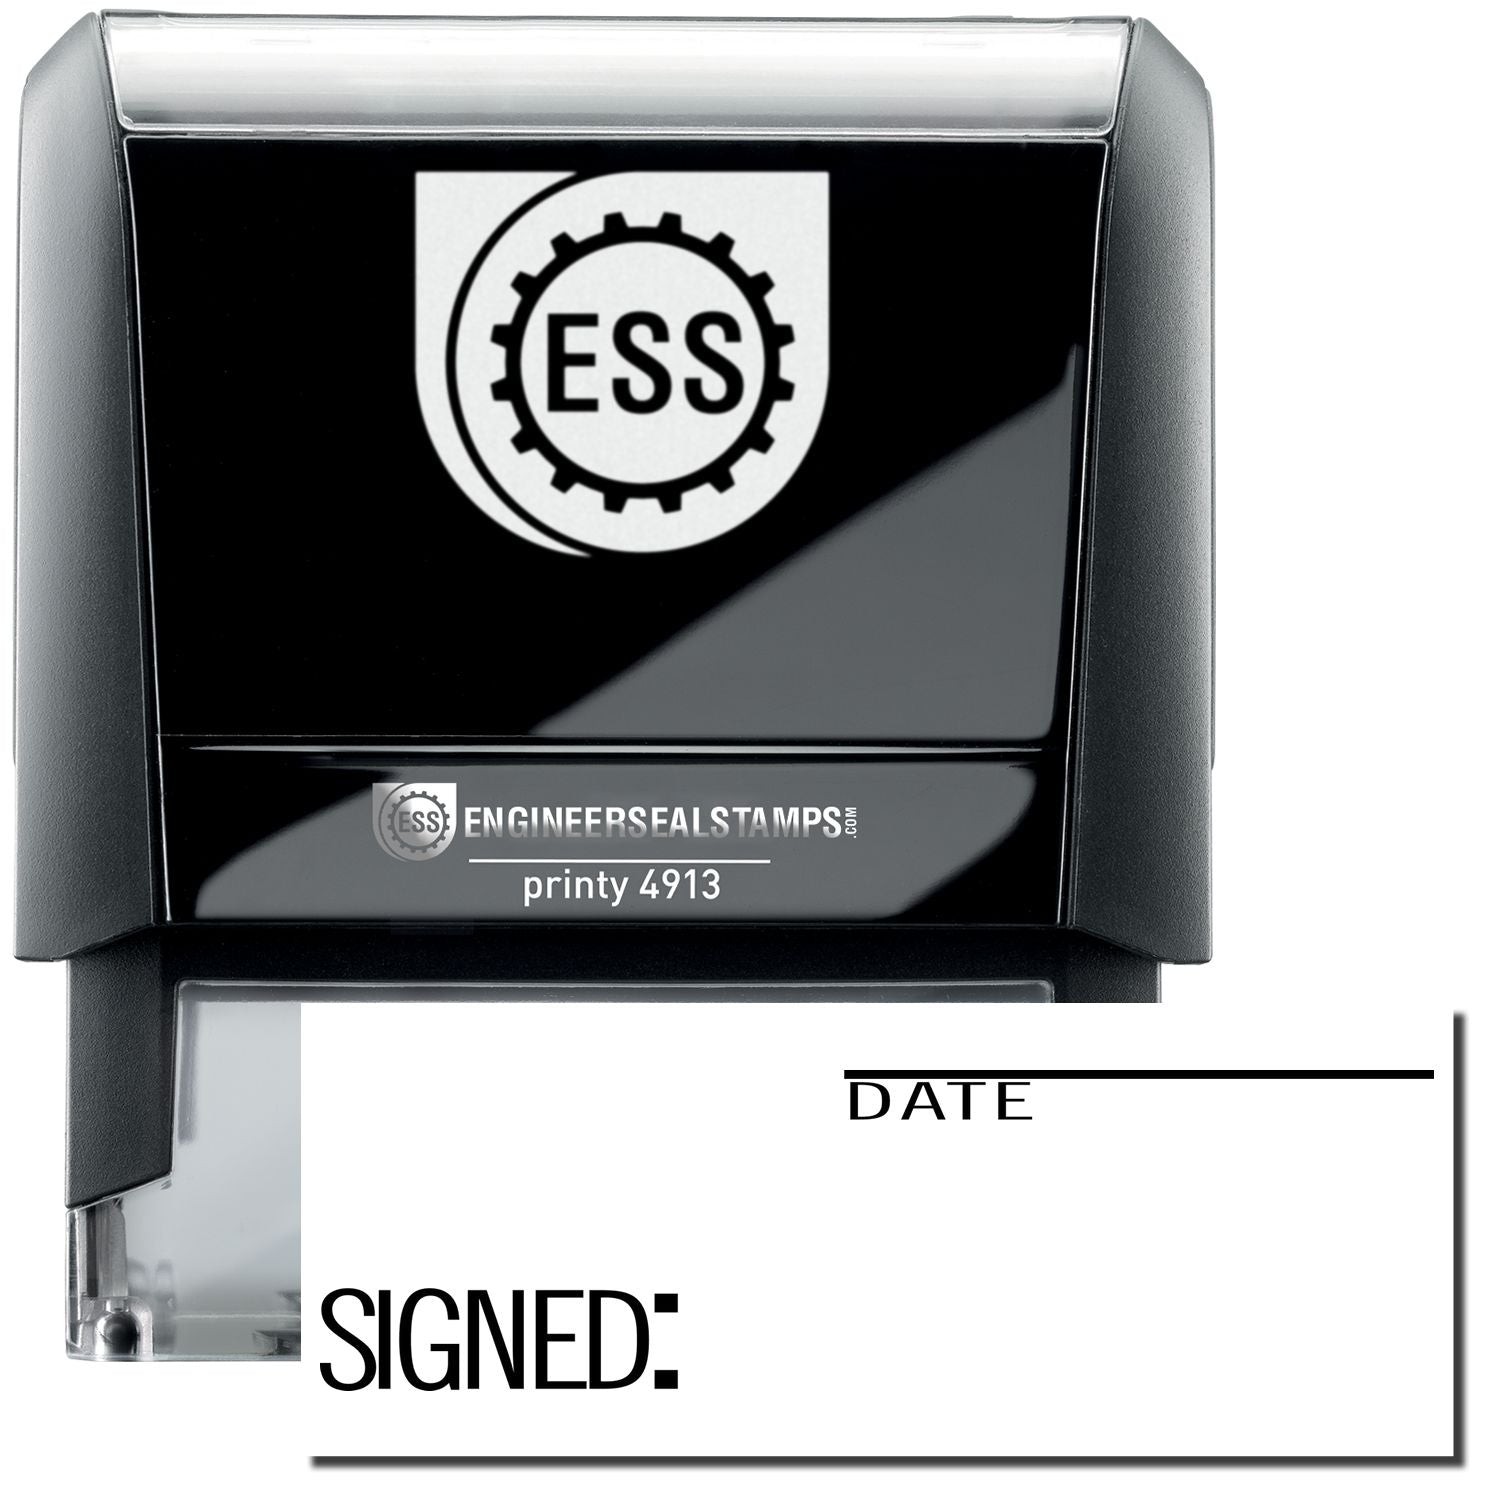 A self-inking stamp with a stamped image showing how the text "SIGNED: DATE" in a large font is displayed by it after stamping (where the word "DATE" is at the top right (with a sleeping line over it) and the word "SIGNED" (with a colon(:)) at the bottom left are shown).